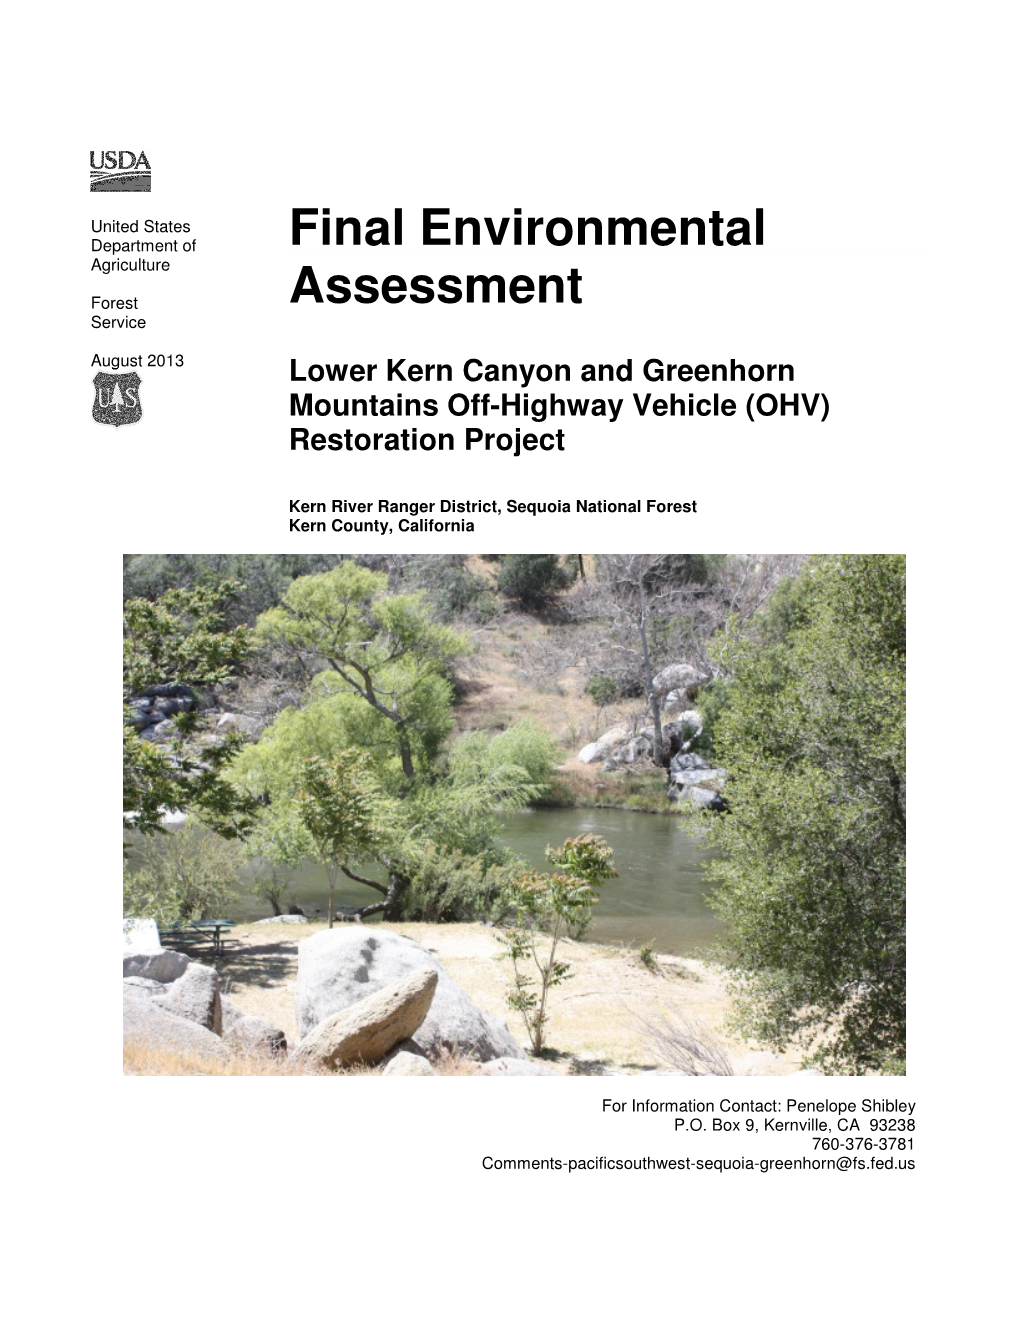 Final Environmental Assessment Lower Kern Canyon and Greenhorn Mountains OHV Restoration ______